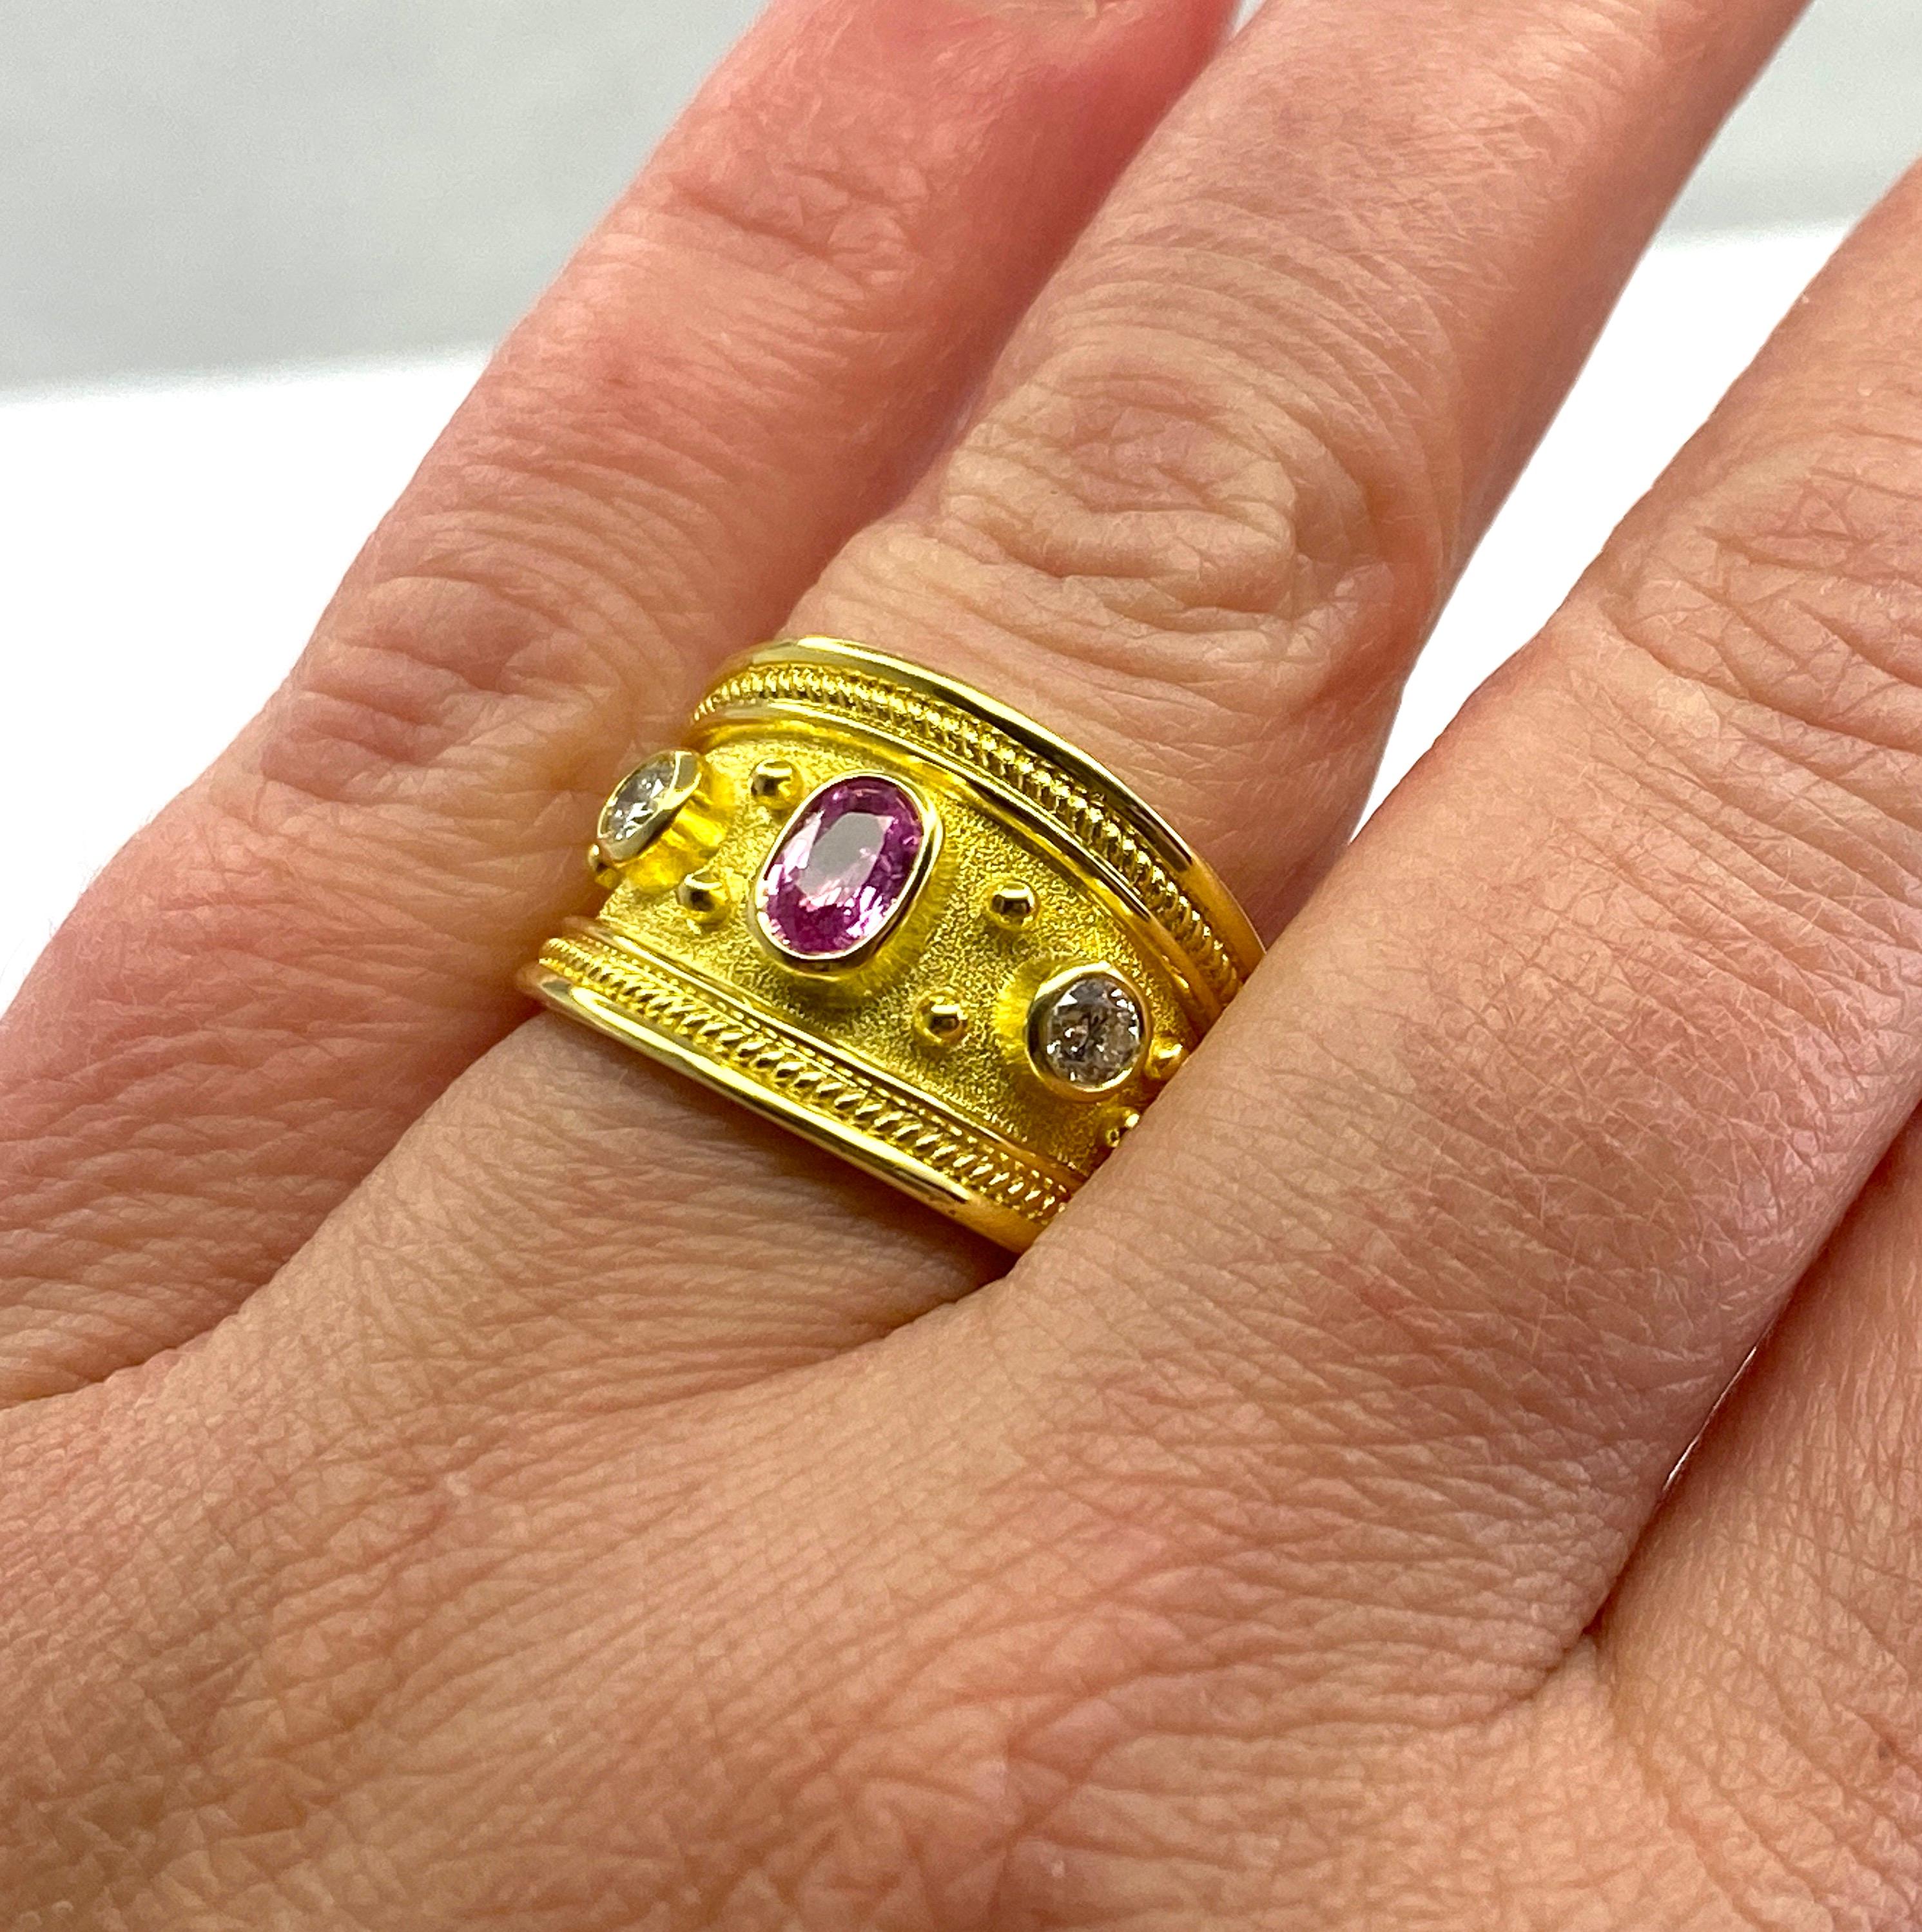 S.Georgios designer graduated ring handmade from solid 18 Karat Yellow Gold. The ring is microscopically decorated with 18 Karat yellow gold beads and twisted wires against the Byzantine velvet background. The ring features a 0.47ct. Oval cut Pink